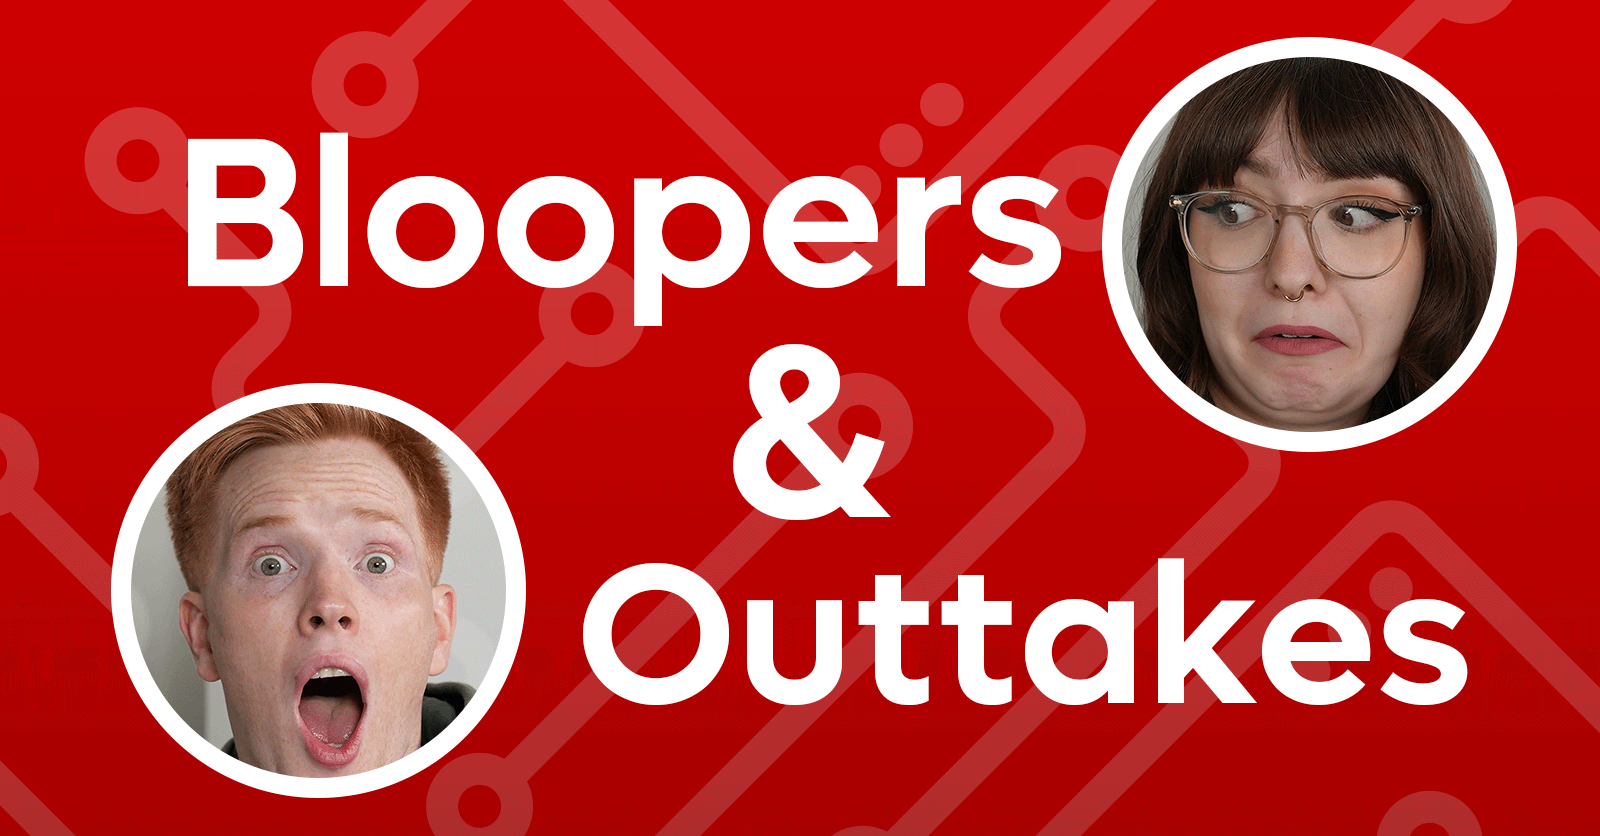 Bloopers & Outtakes